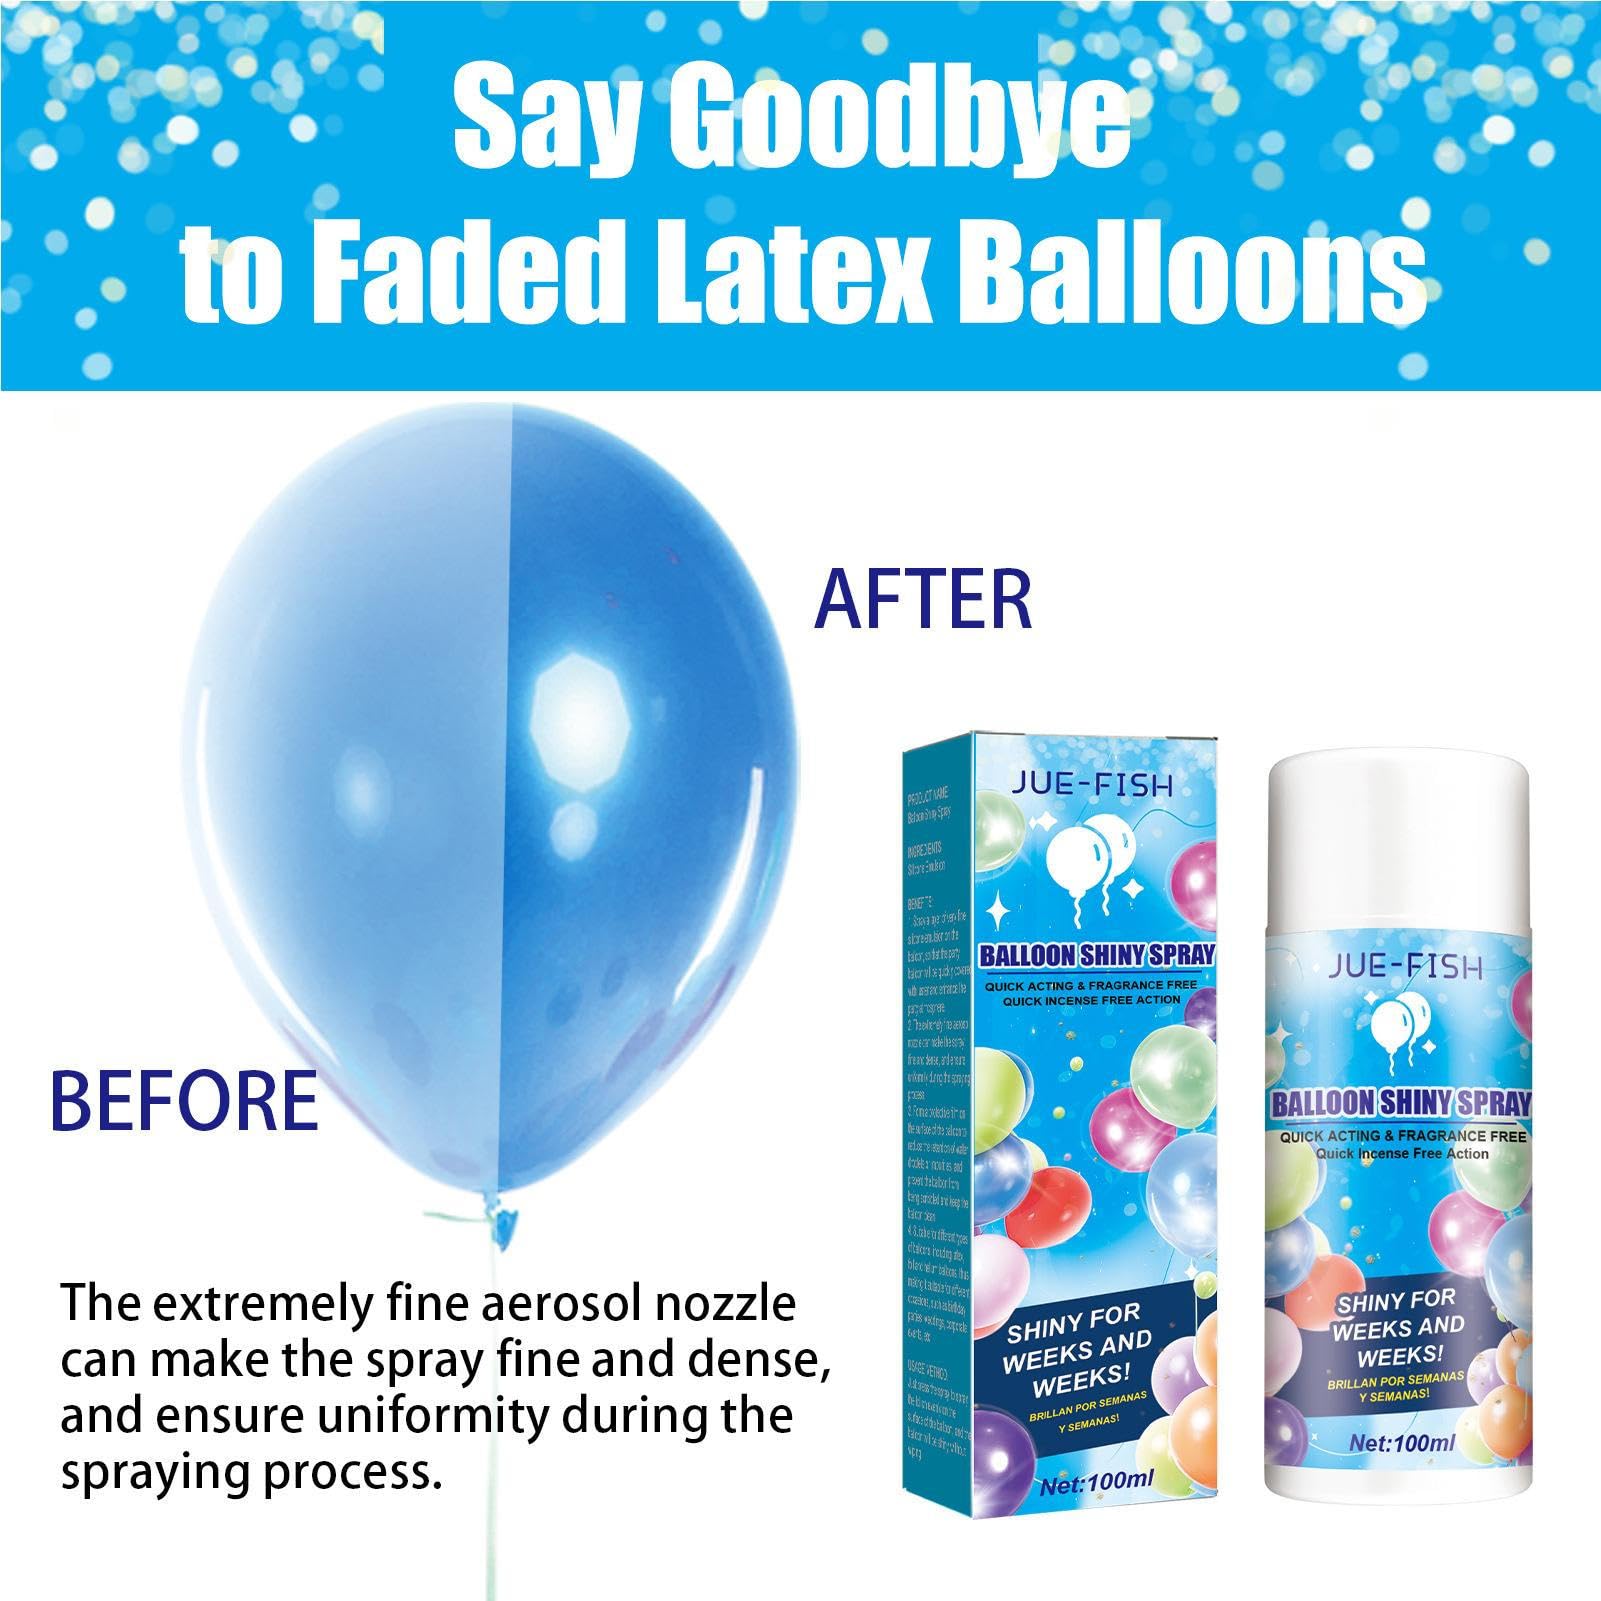 Balloon High Shine Spray for Latex Balloons | Aerosol Balloon Spray,Balloon Spray Shine for an Elegant Hi Gloss Finish in Minutes,Ultra Shiny Glow Spray Party Decoration and Enhancer Shimmer Effect